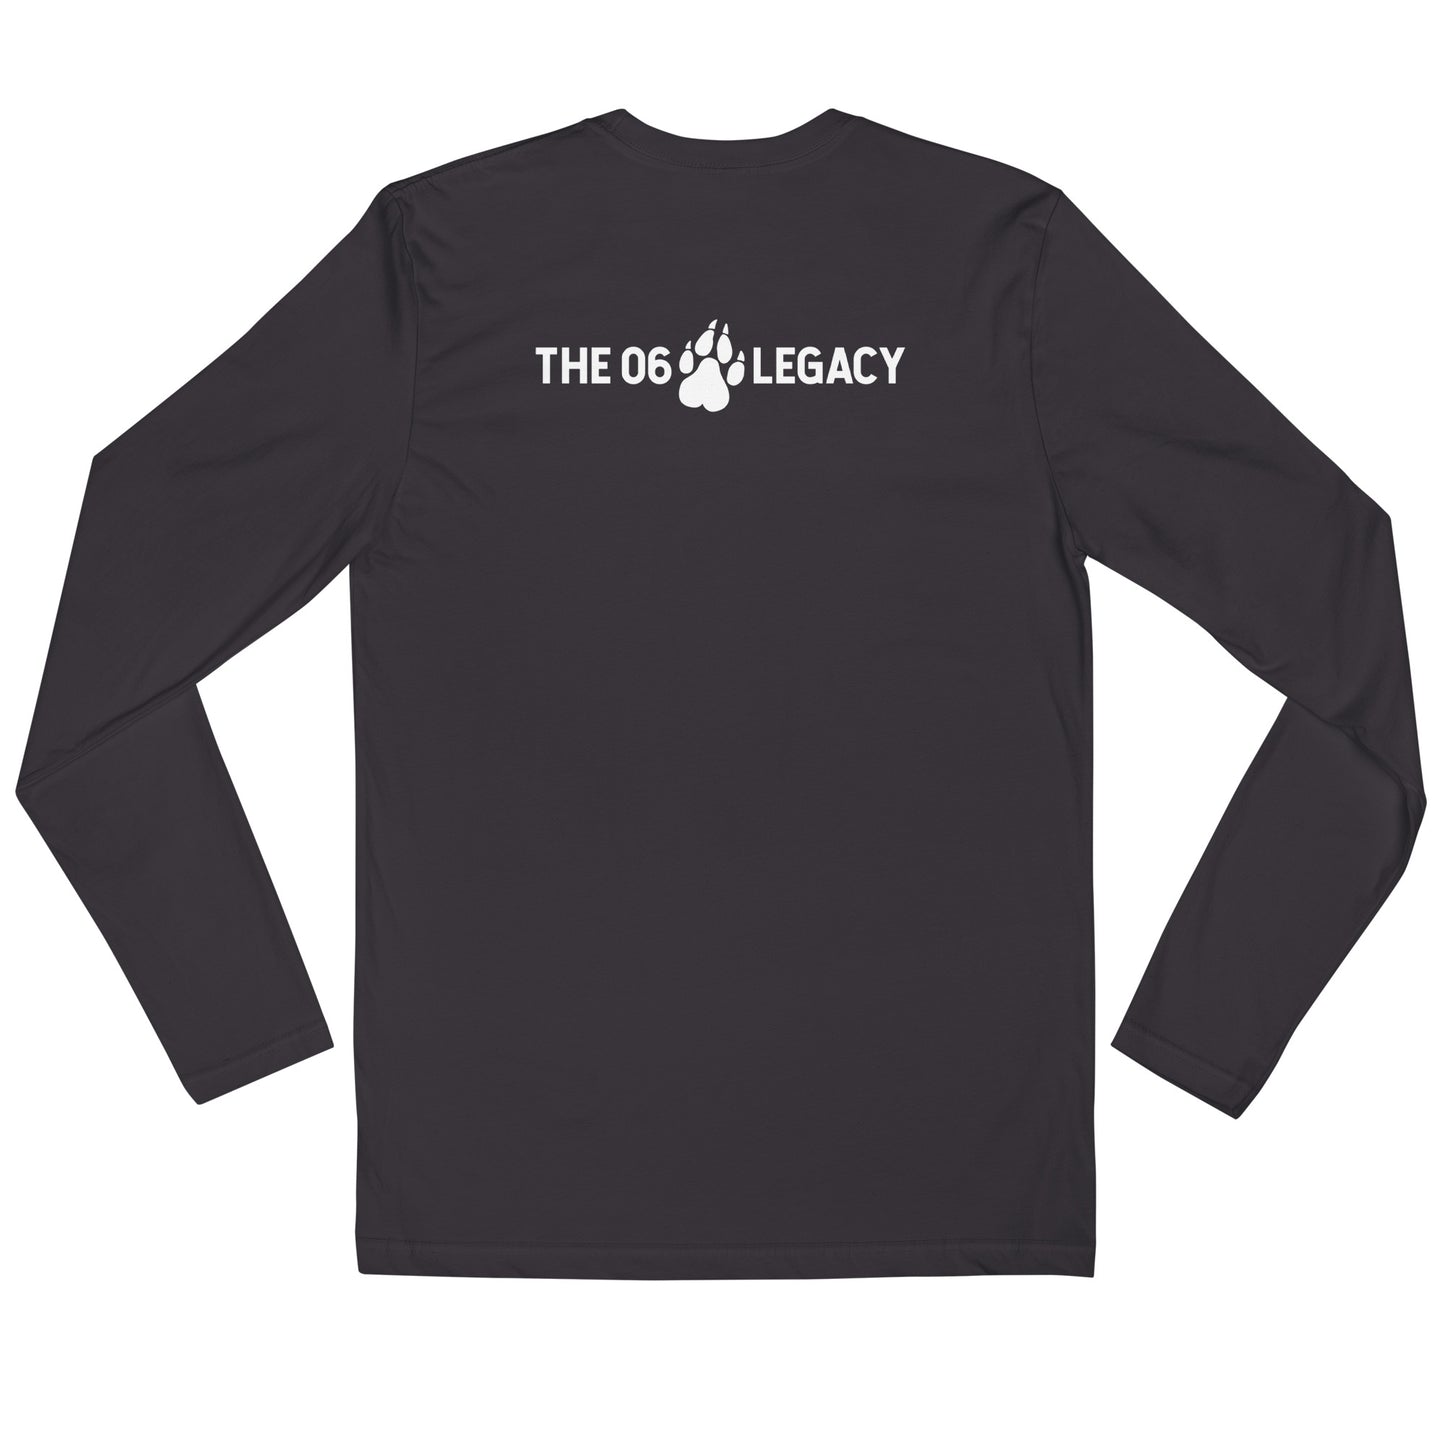 Long sleeve fitted crew